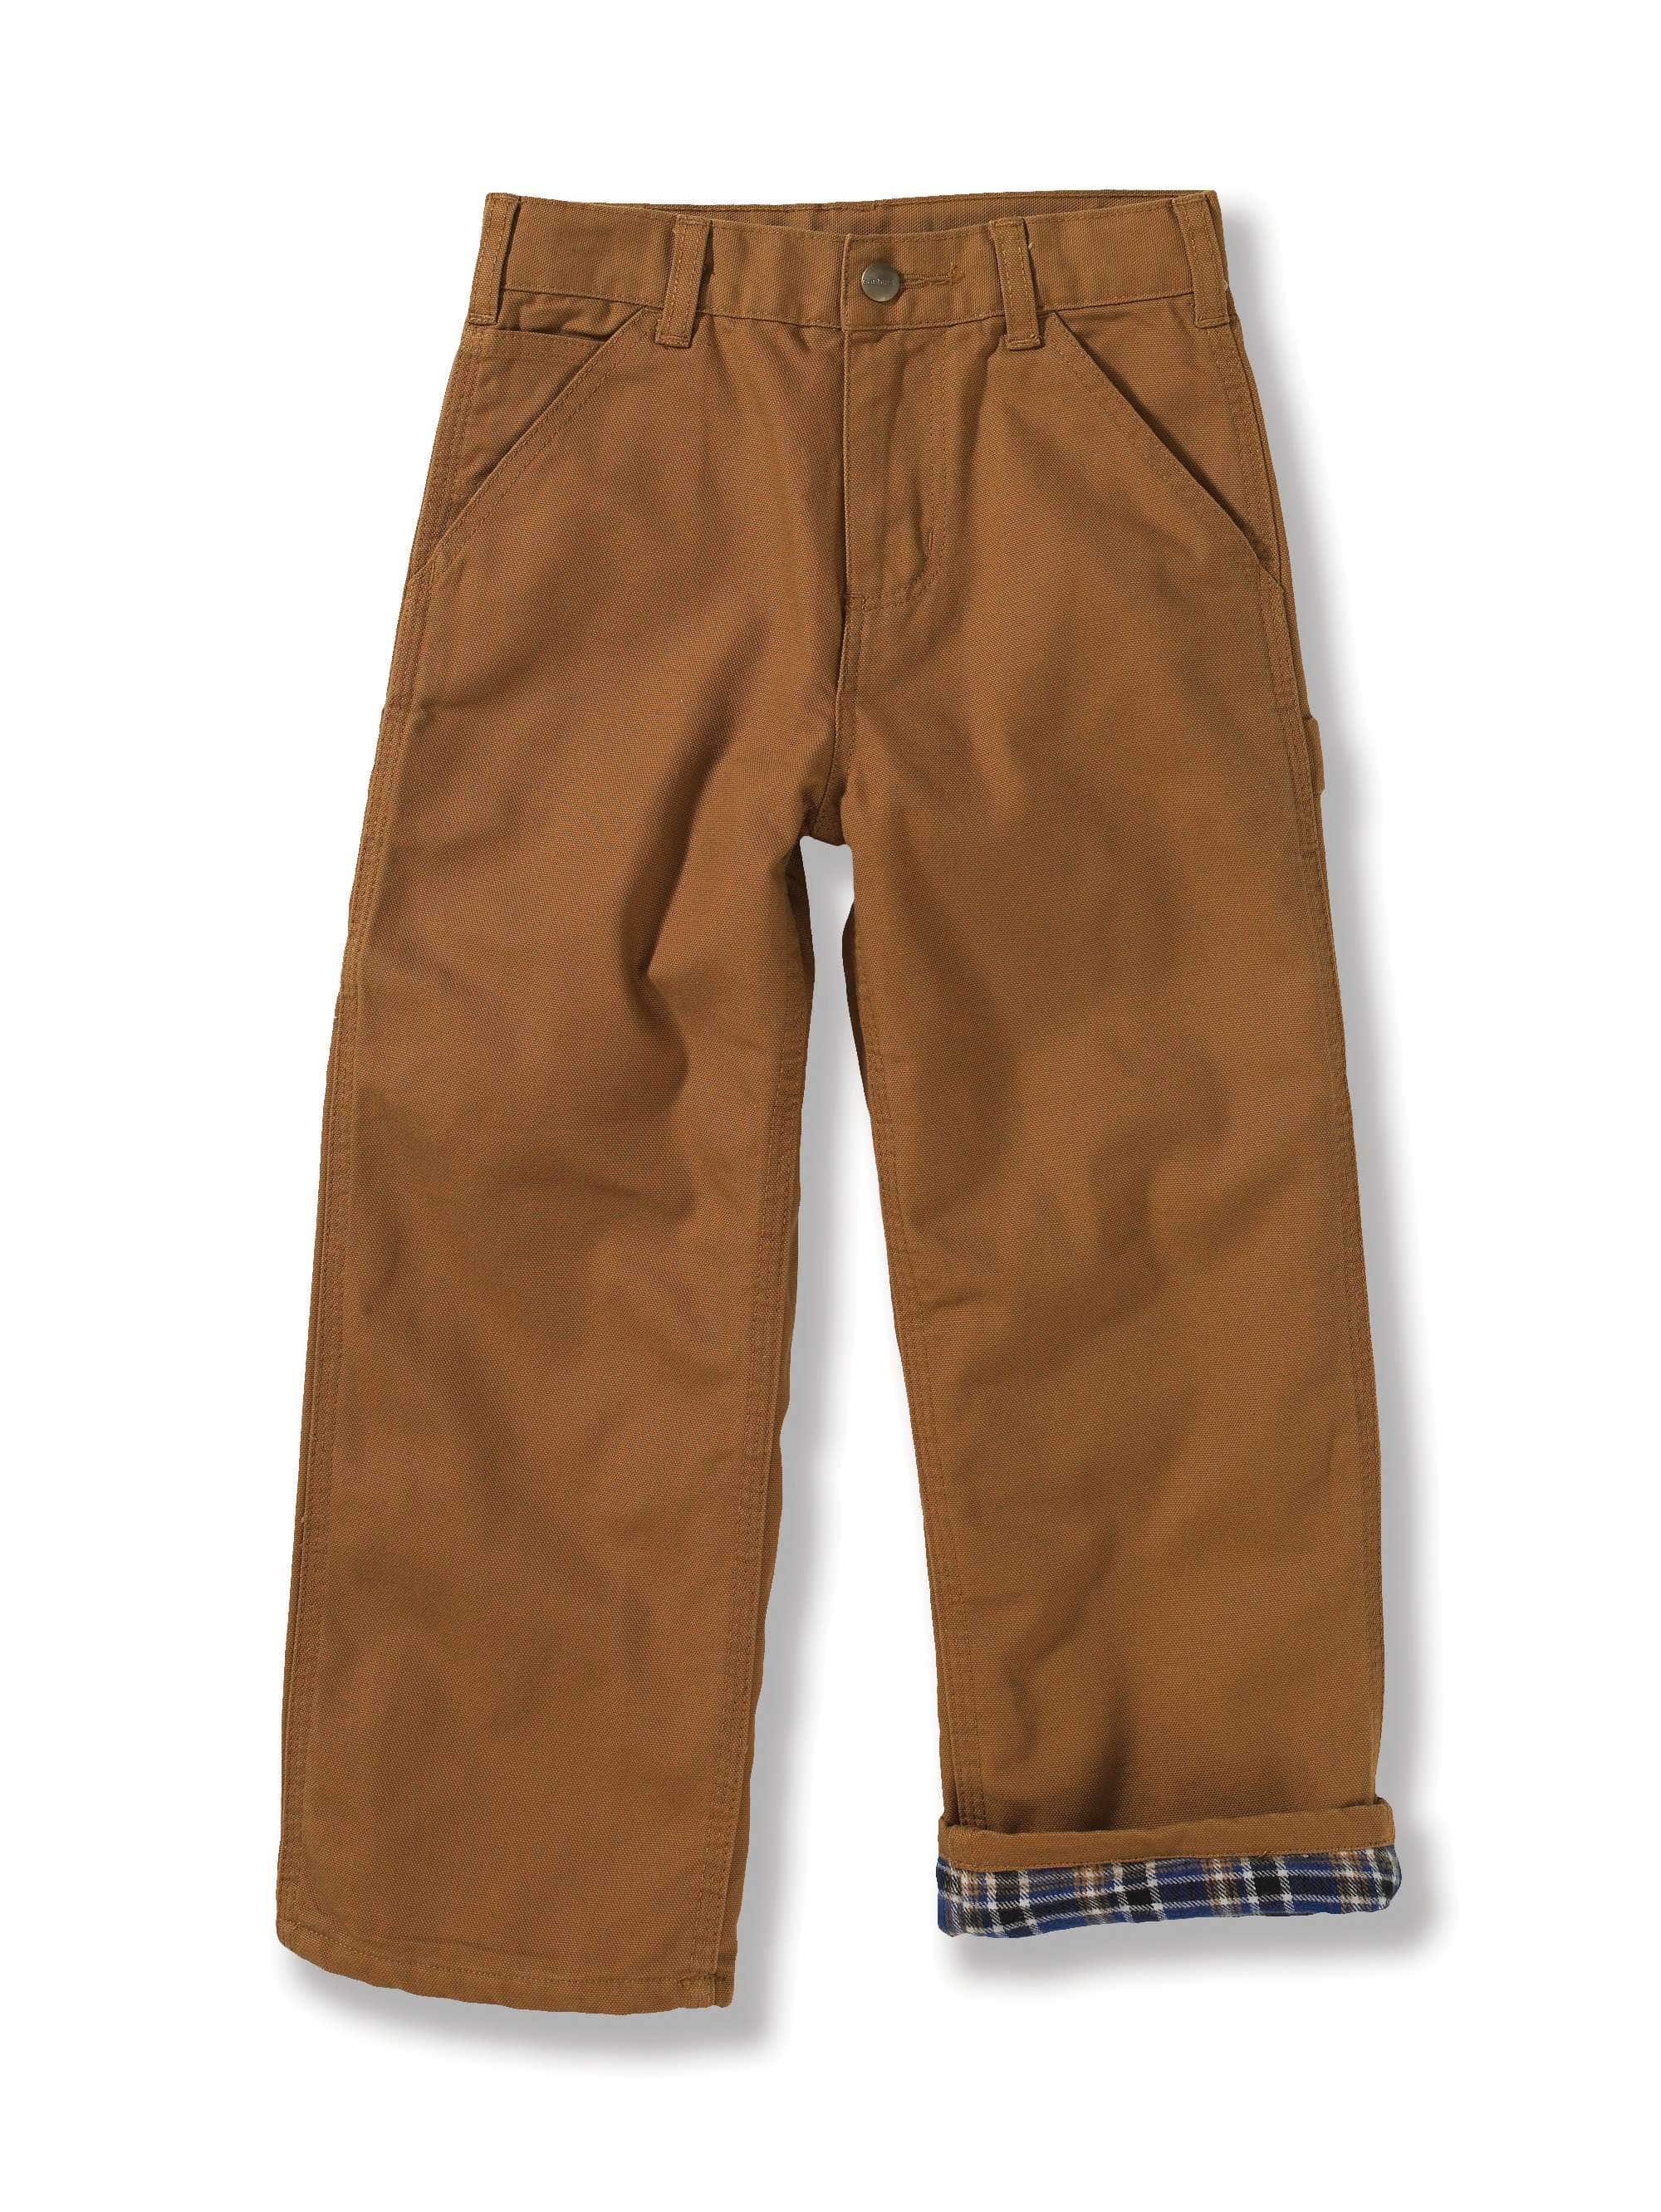 carhartt thermal lined pants